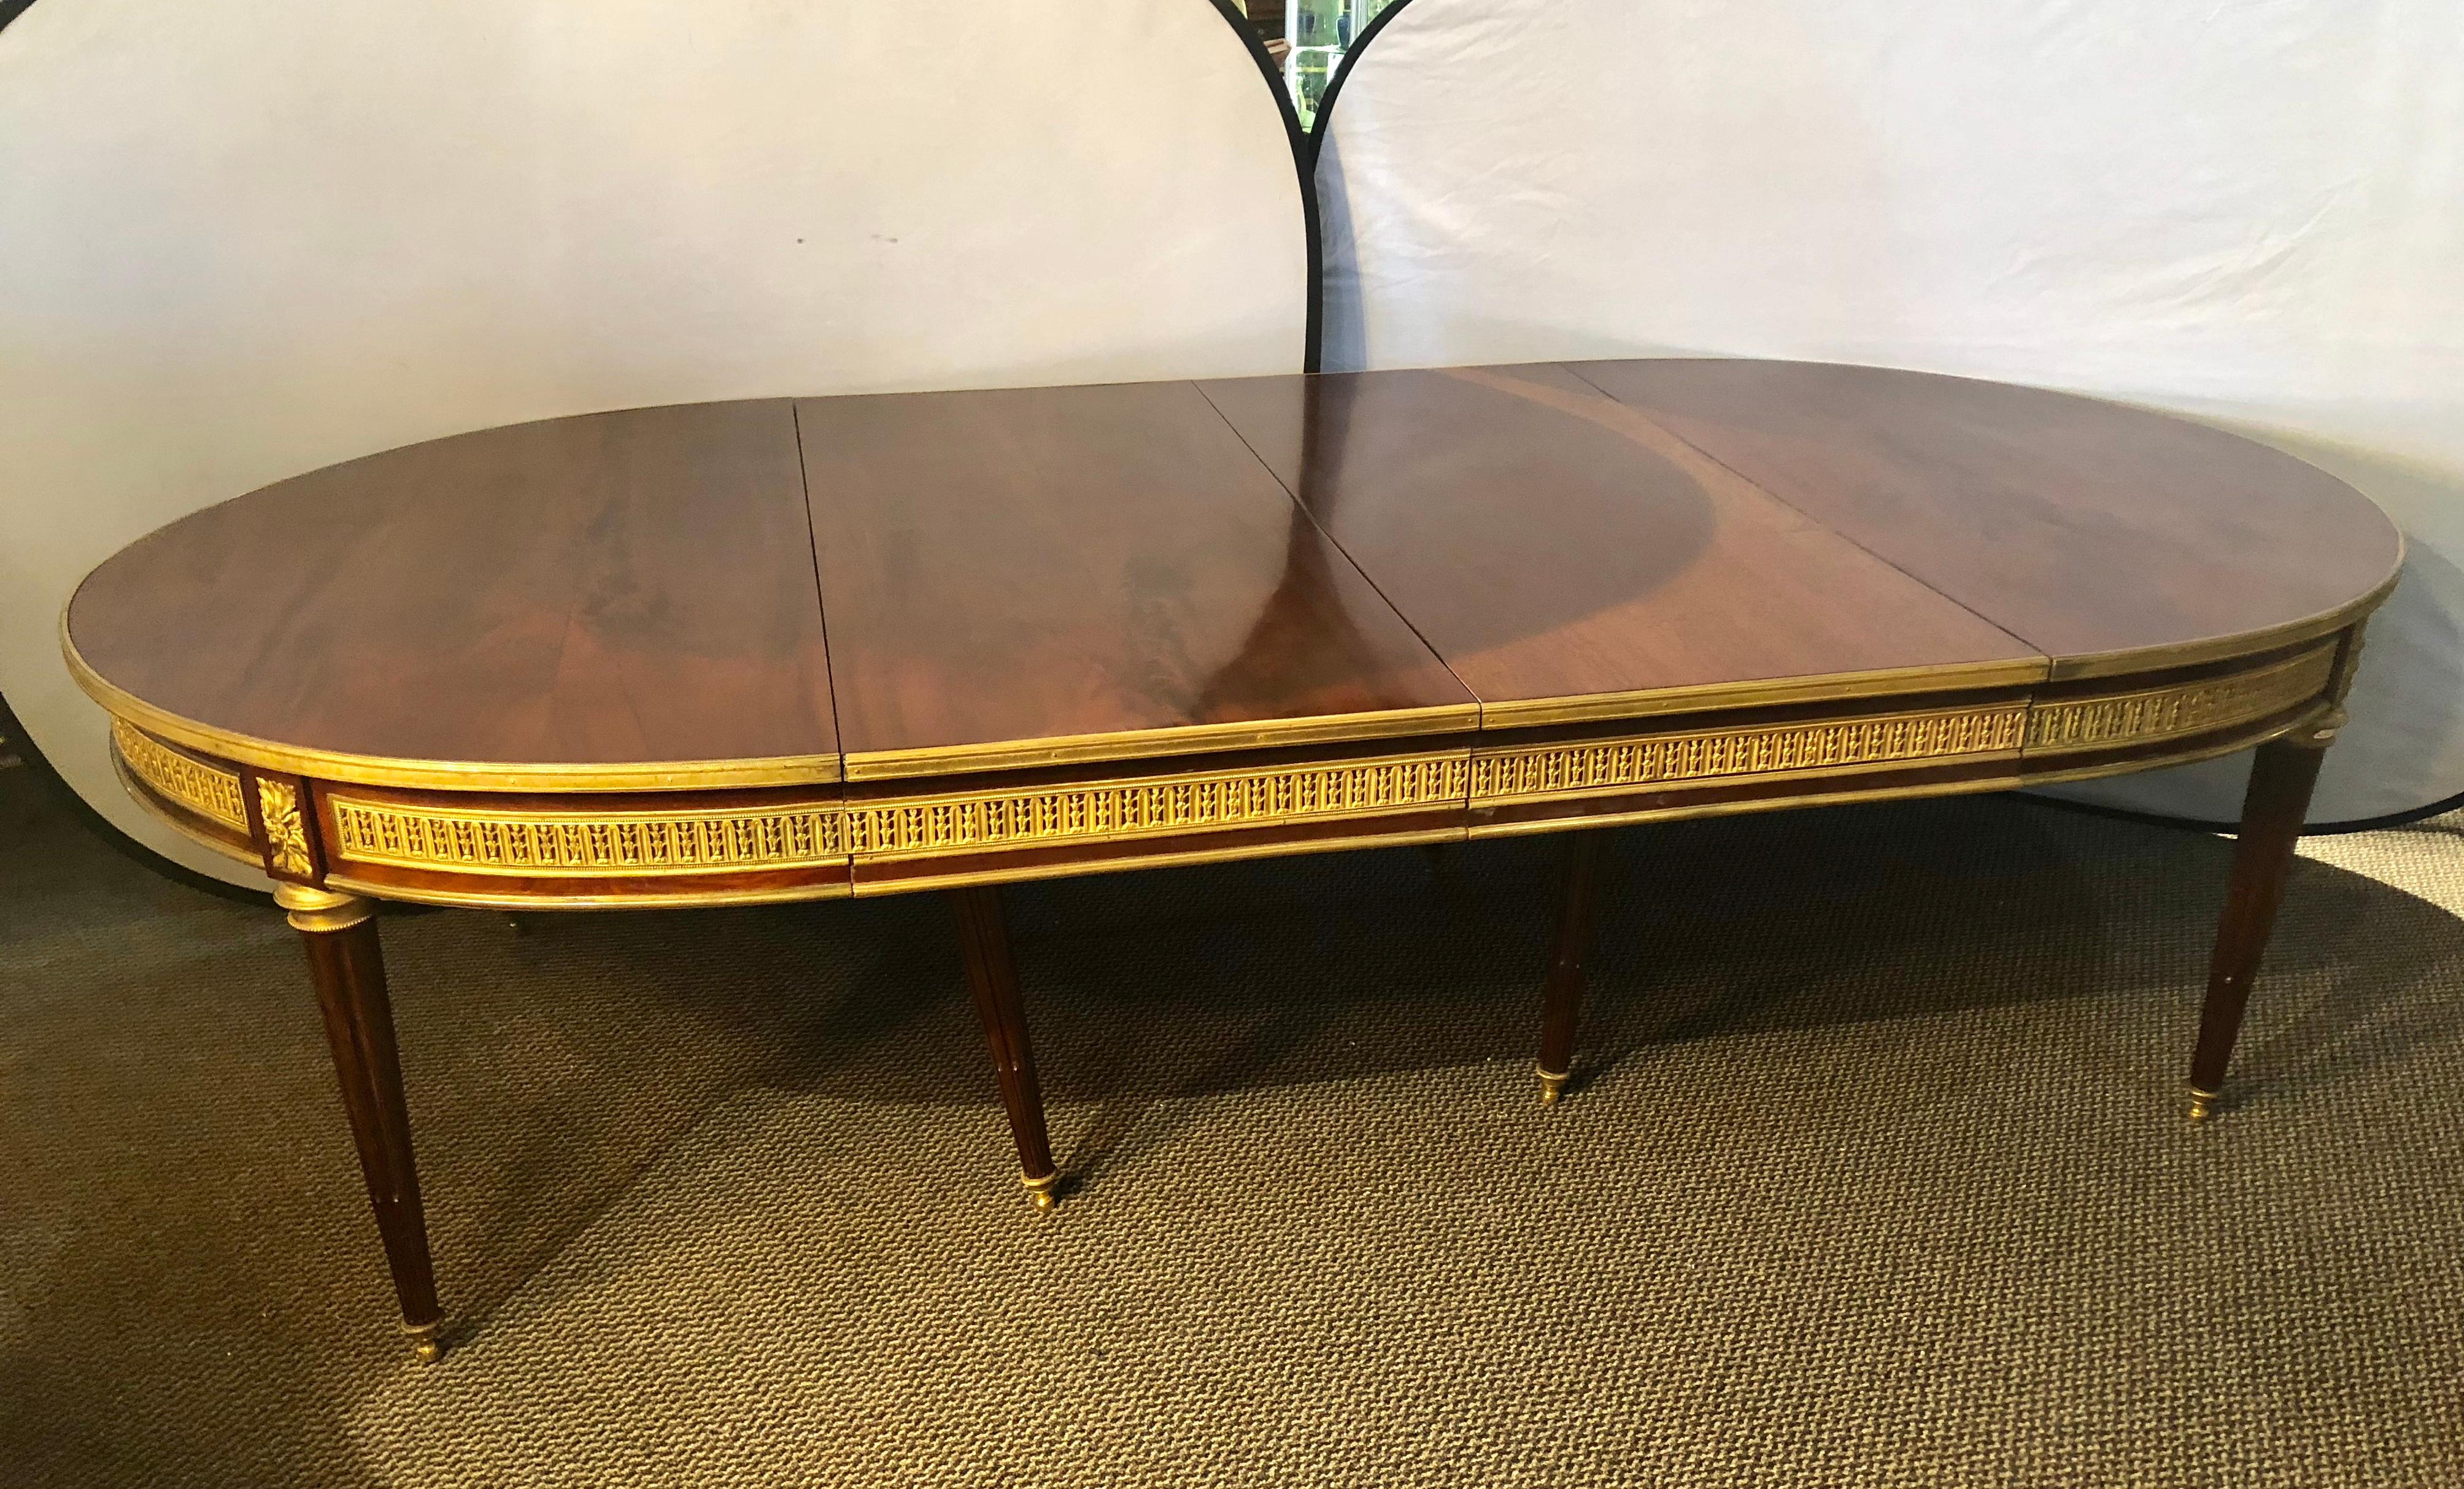 The finest late19th-early 20th century French dining table on the market. An Early Maison Jansen bronze mounted crotch mahogany dining table. Simply the most spectacular, almost circular, dining table by this highly sought after designer having two